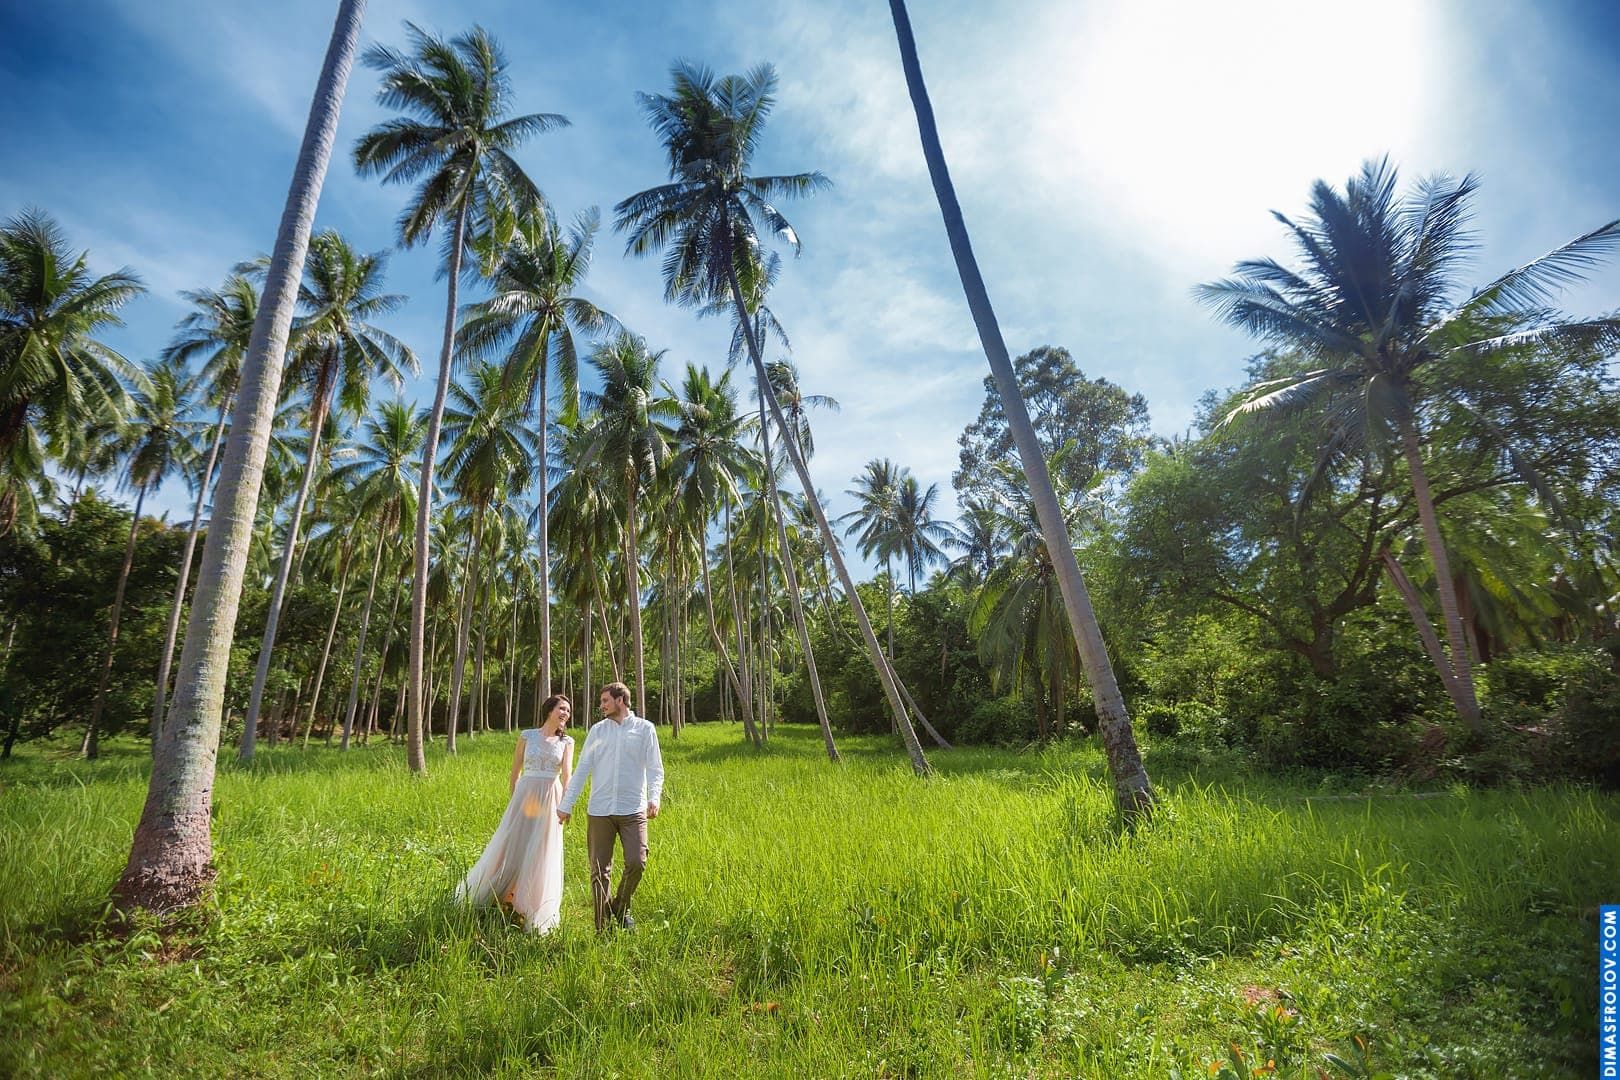 Coconut forest as location for photo shoot. photographer Dimas Frolov. photo1383